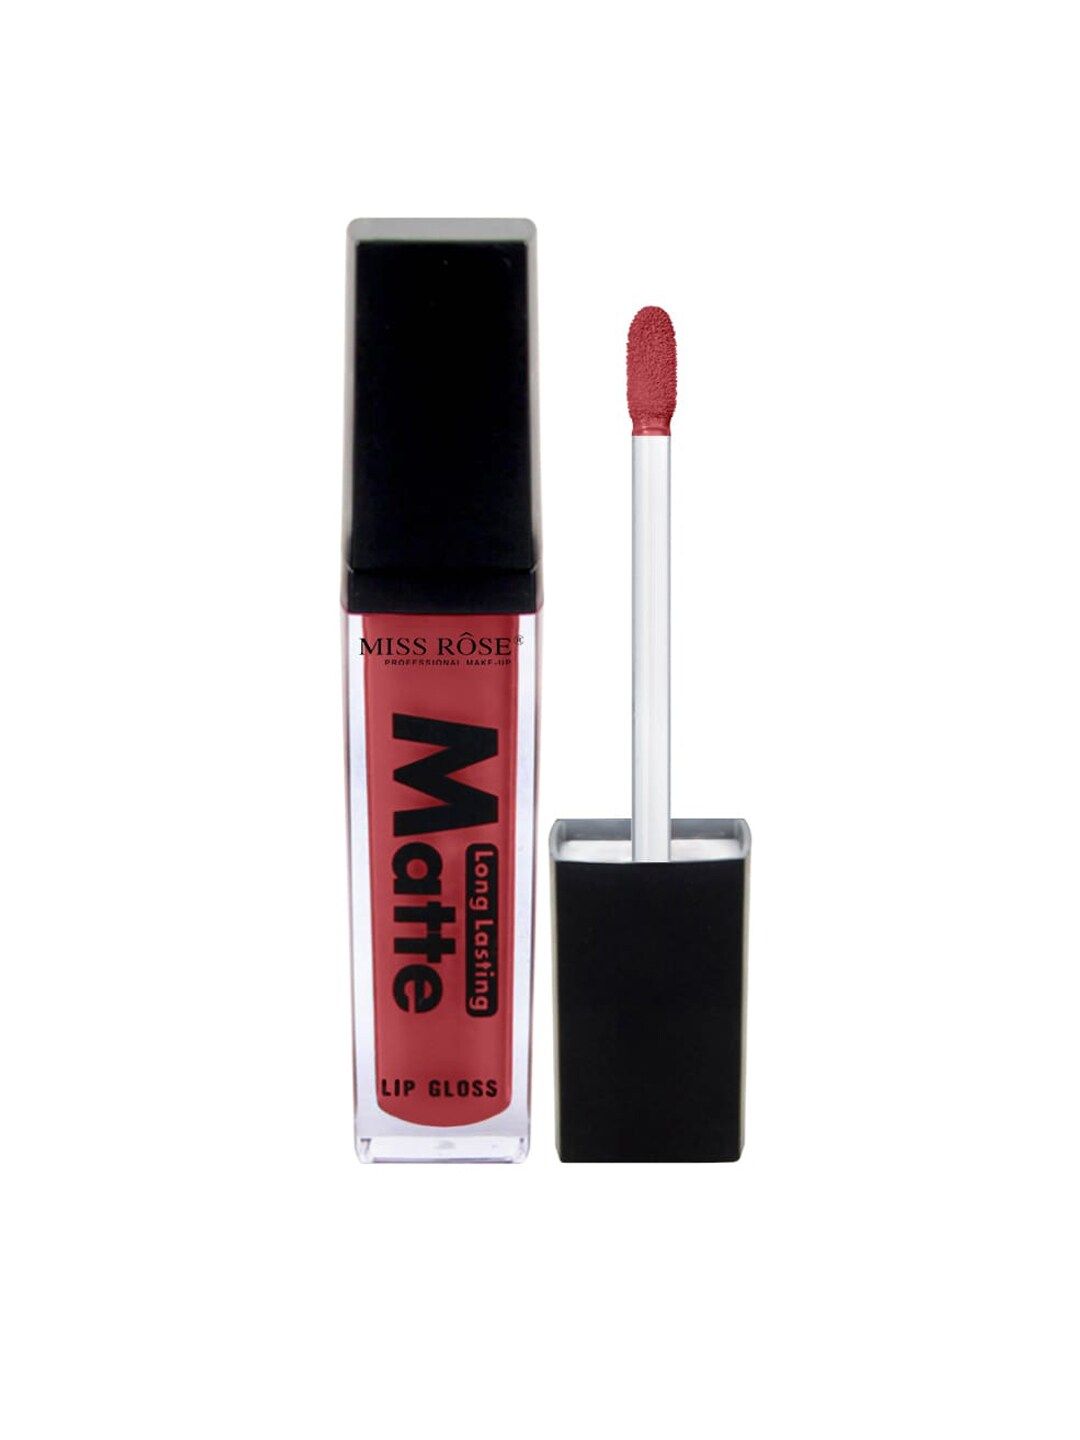 MISS ROSE Matte Long Lasting LipGloss 7701-002M 14 20 gm Price in India